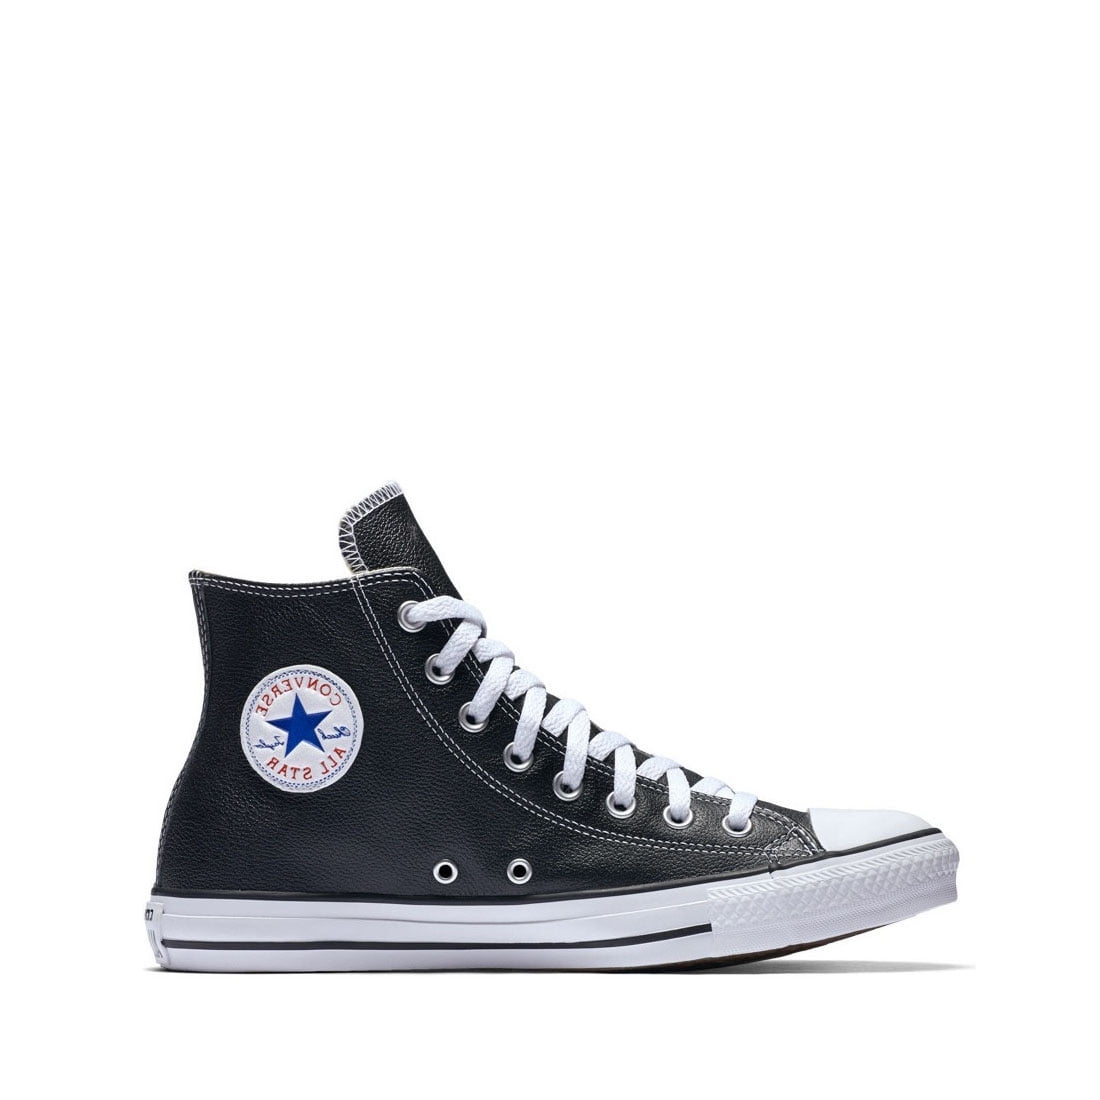 Converse Canvas Shoes Price | lupon.gov.ph